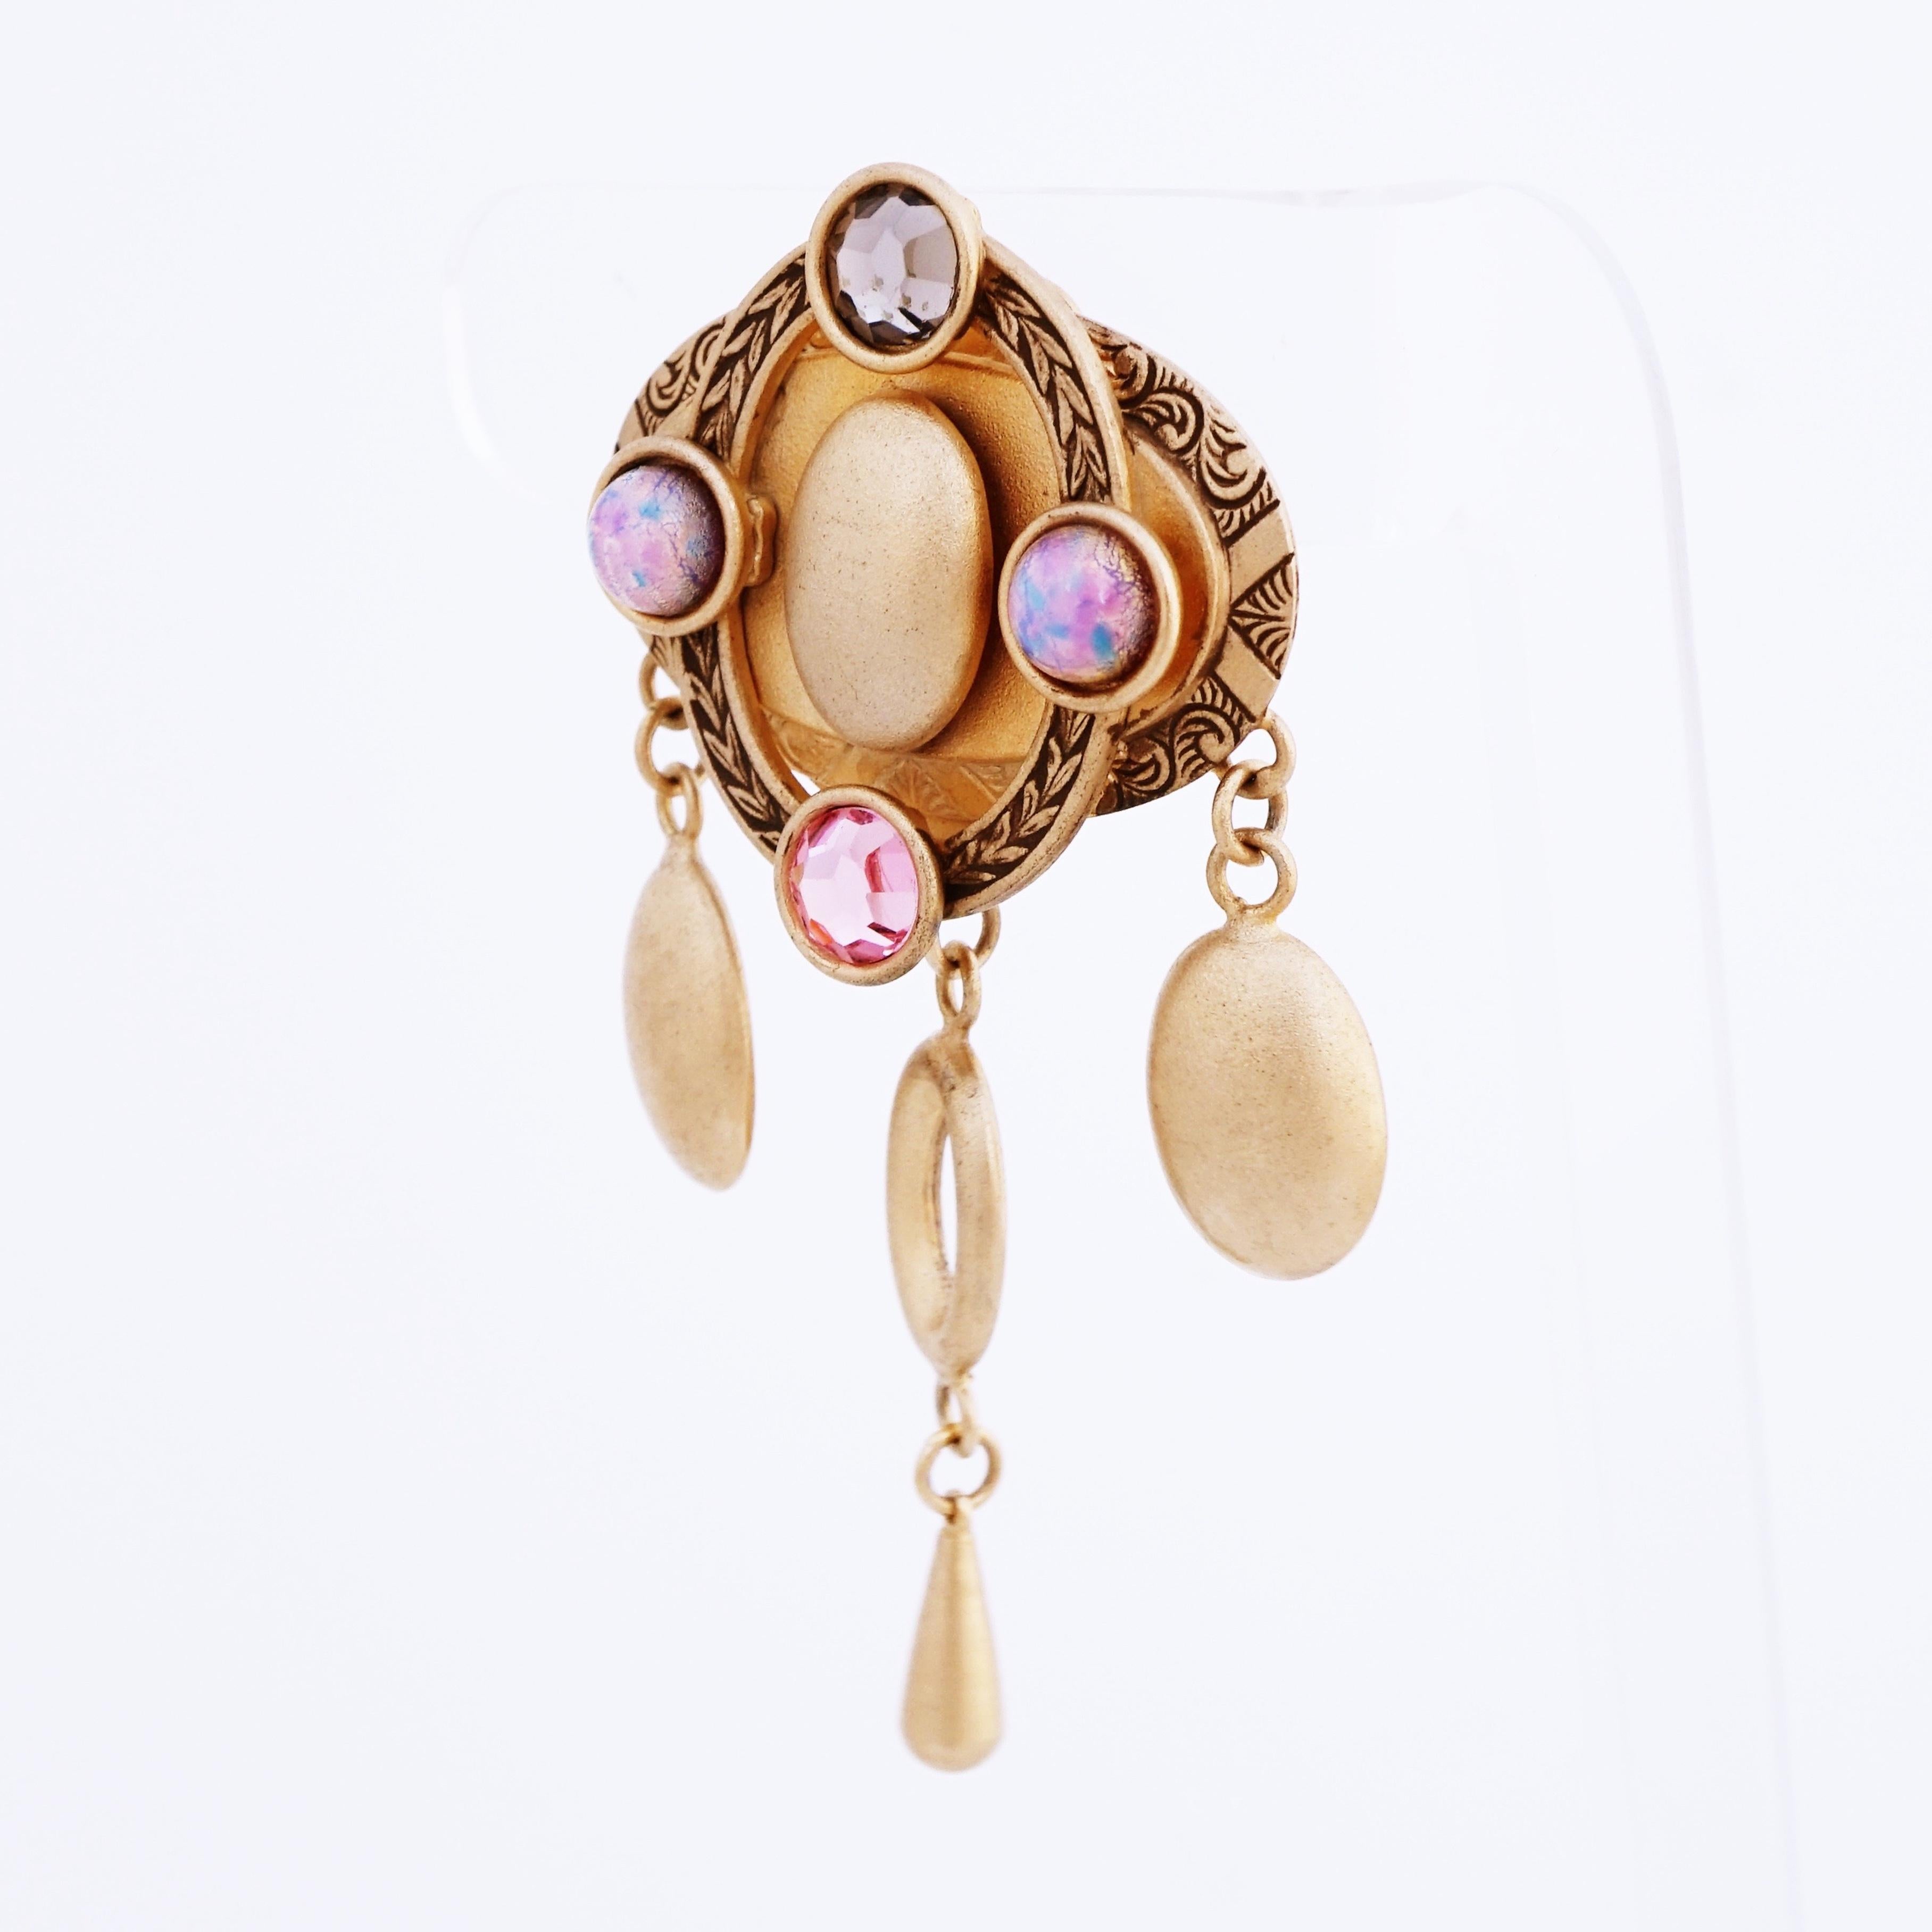 Modern Champagne Gold Dangle Earrings With Opals and Crystals By Natasha Stambouli For Sale